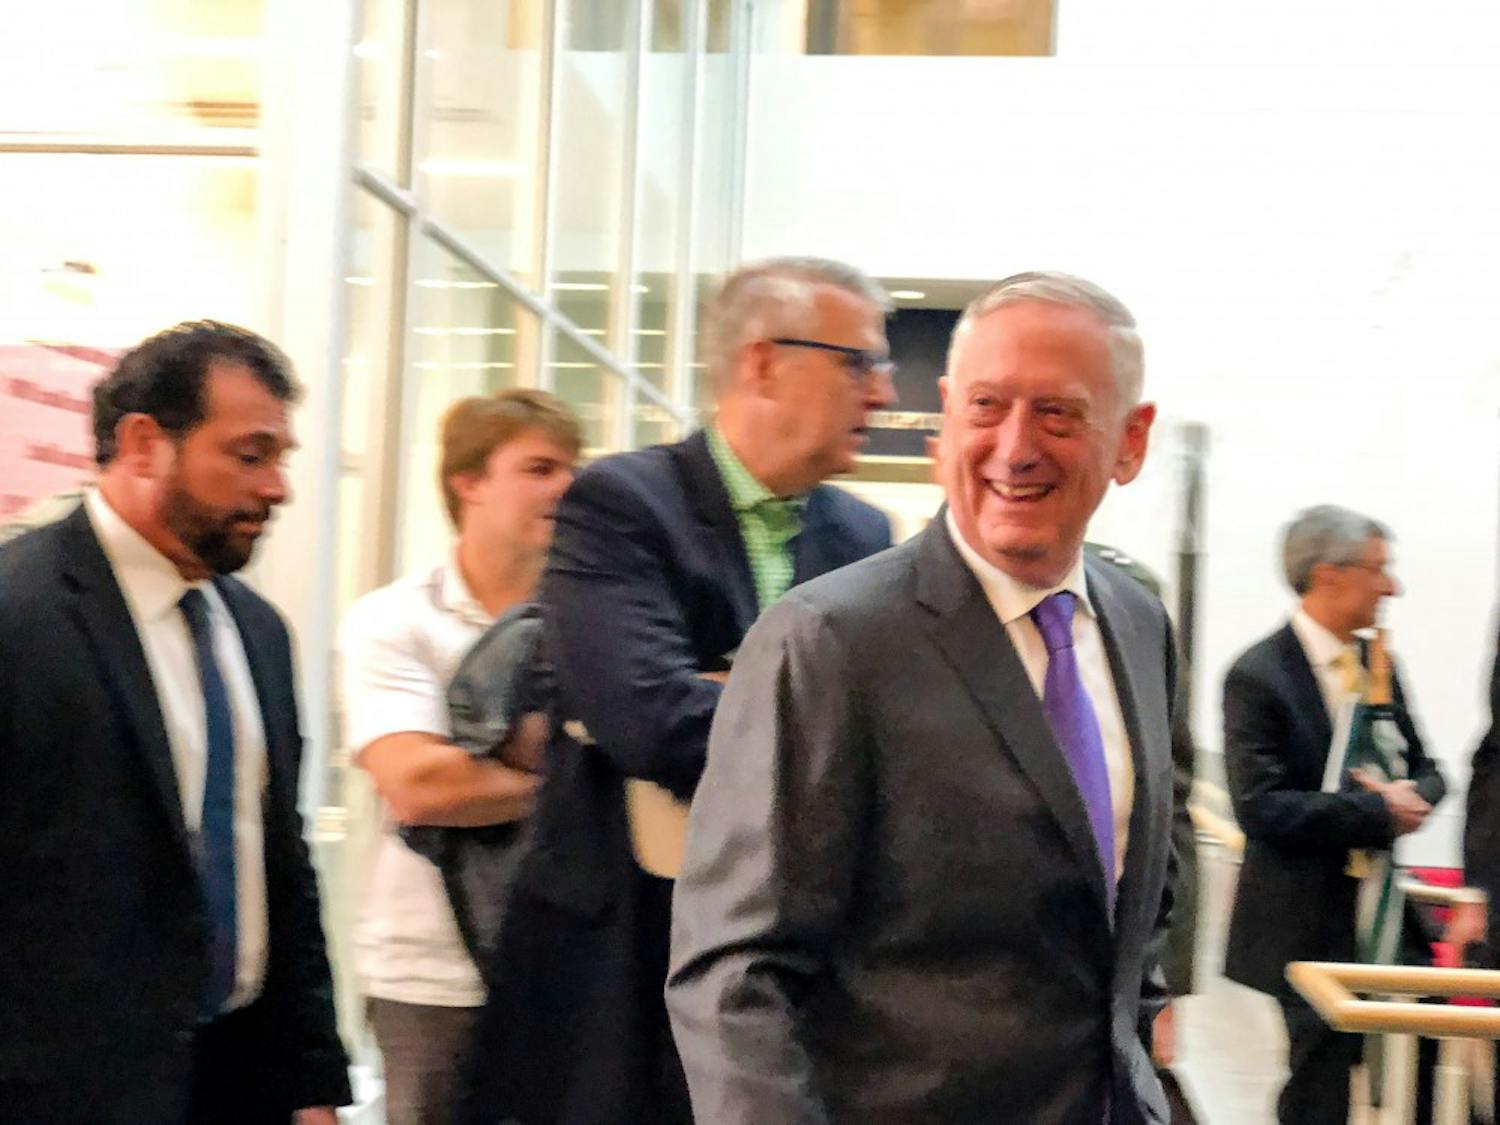 James Mattis interacted briefly with the public after giving his remarks at the Black Family Visual Arts Center on Friday, September 21.